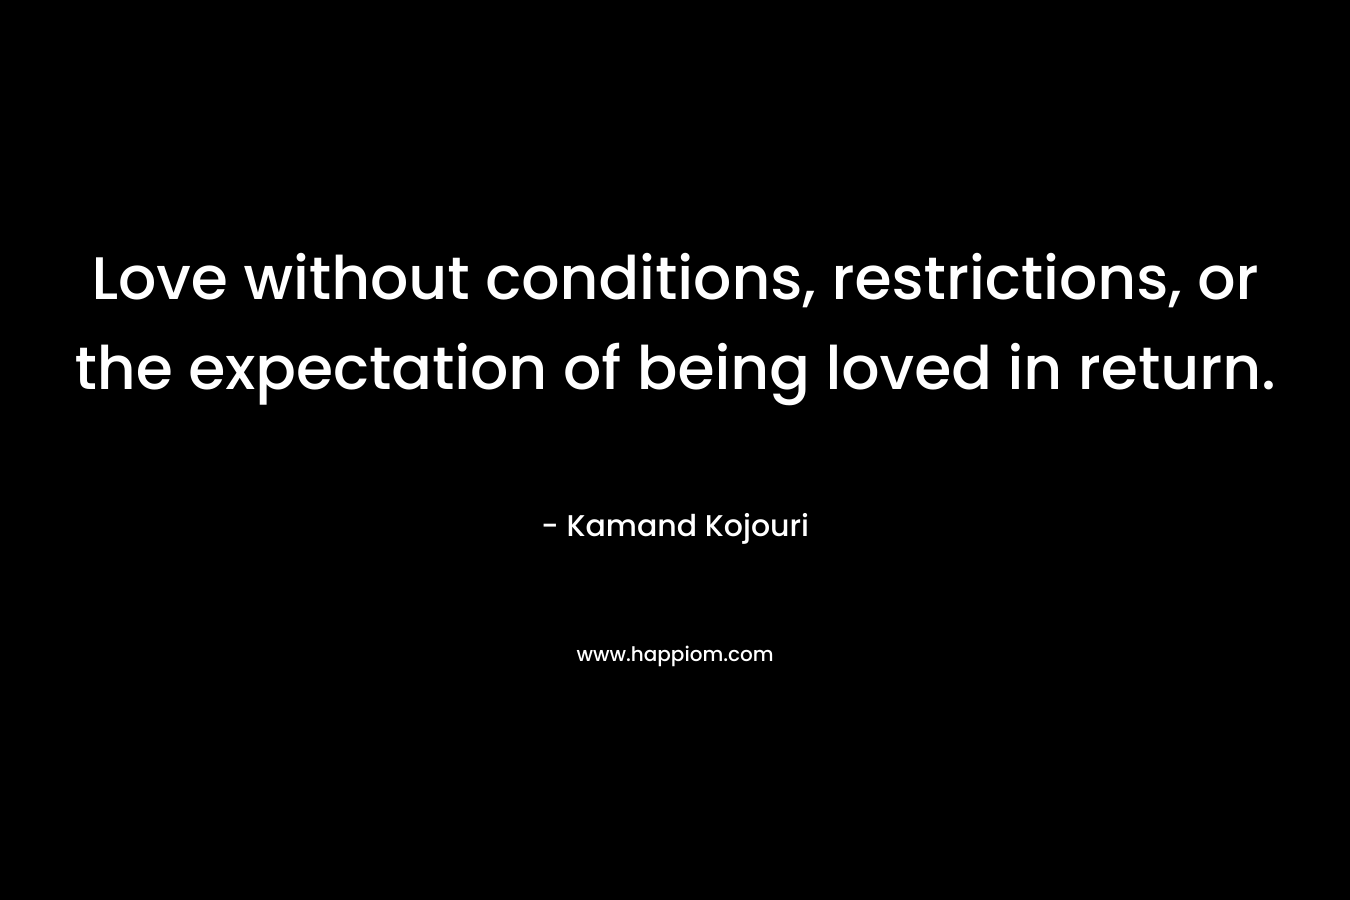 Love without conditions, restrictions, or the expectation of being loved in return. – Kamand Kojouri